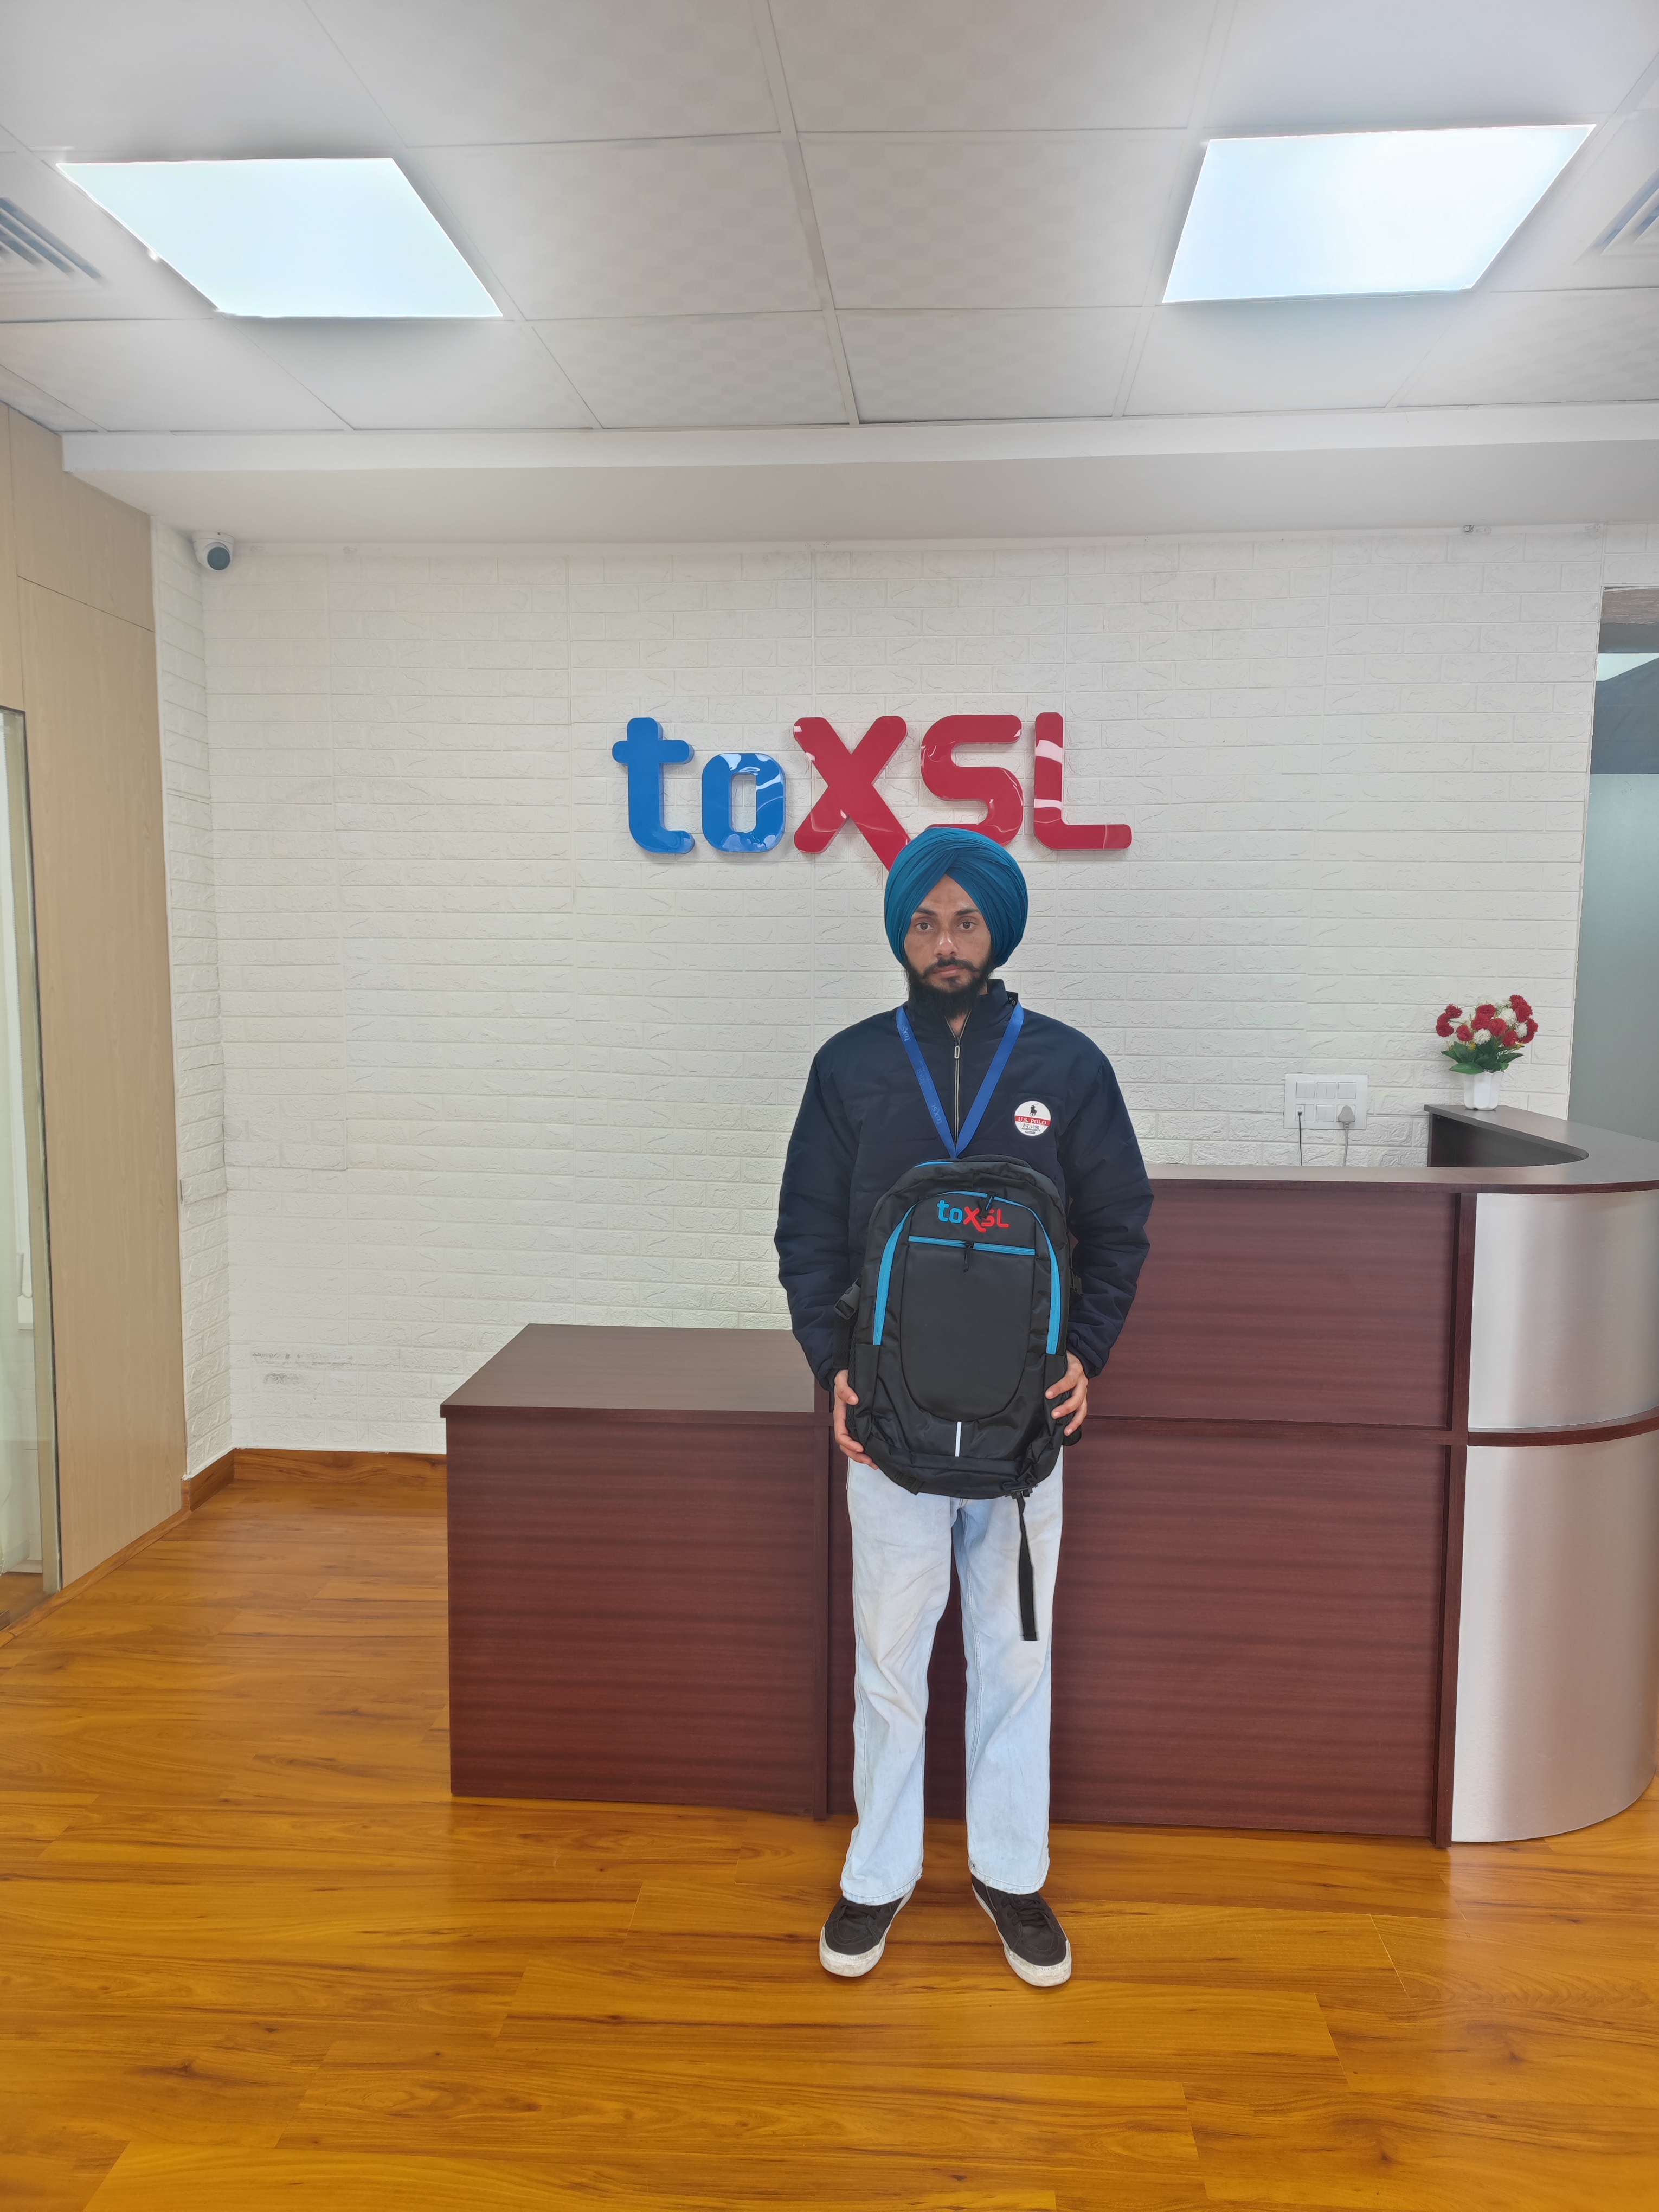 Building a Stronger Team: ToXSL Technologies welcomes new Joinees with open arms